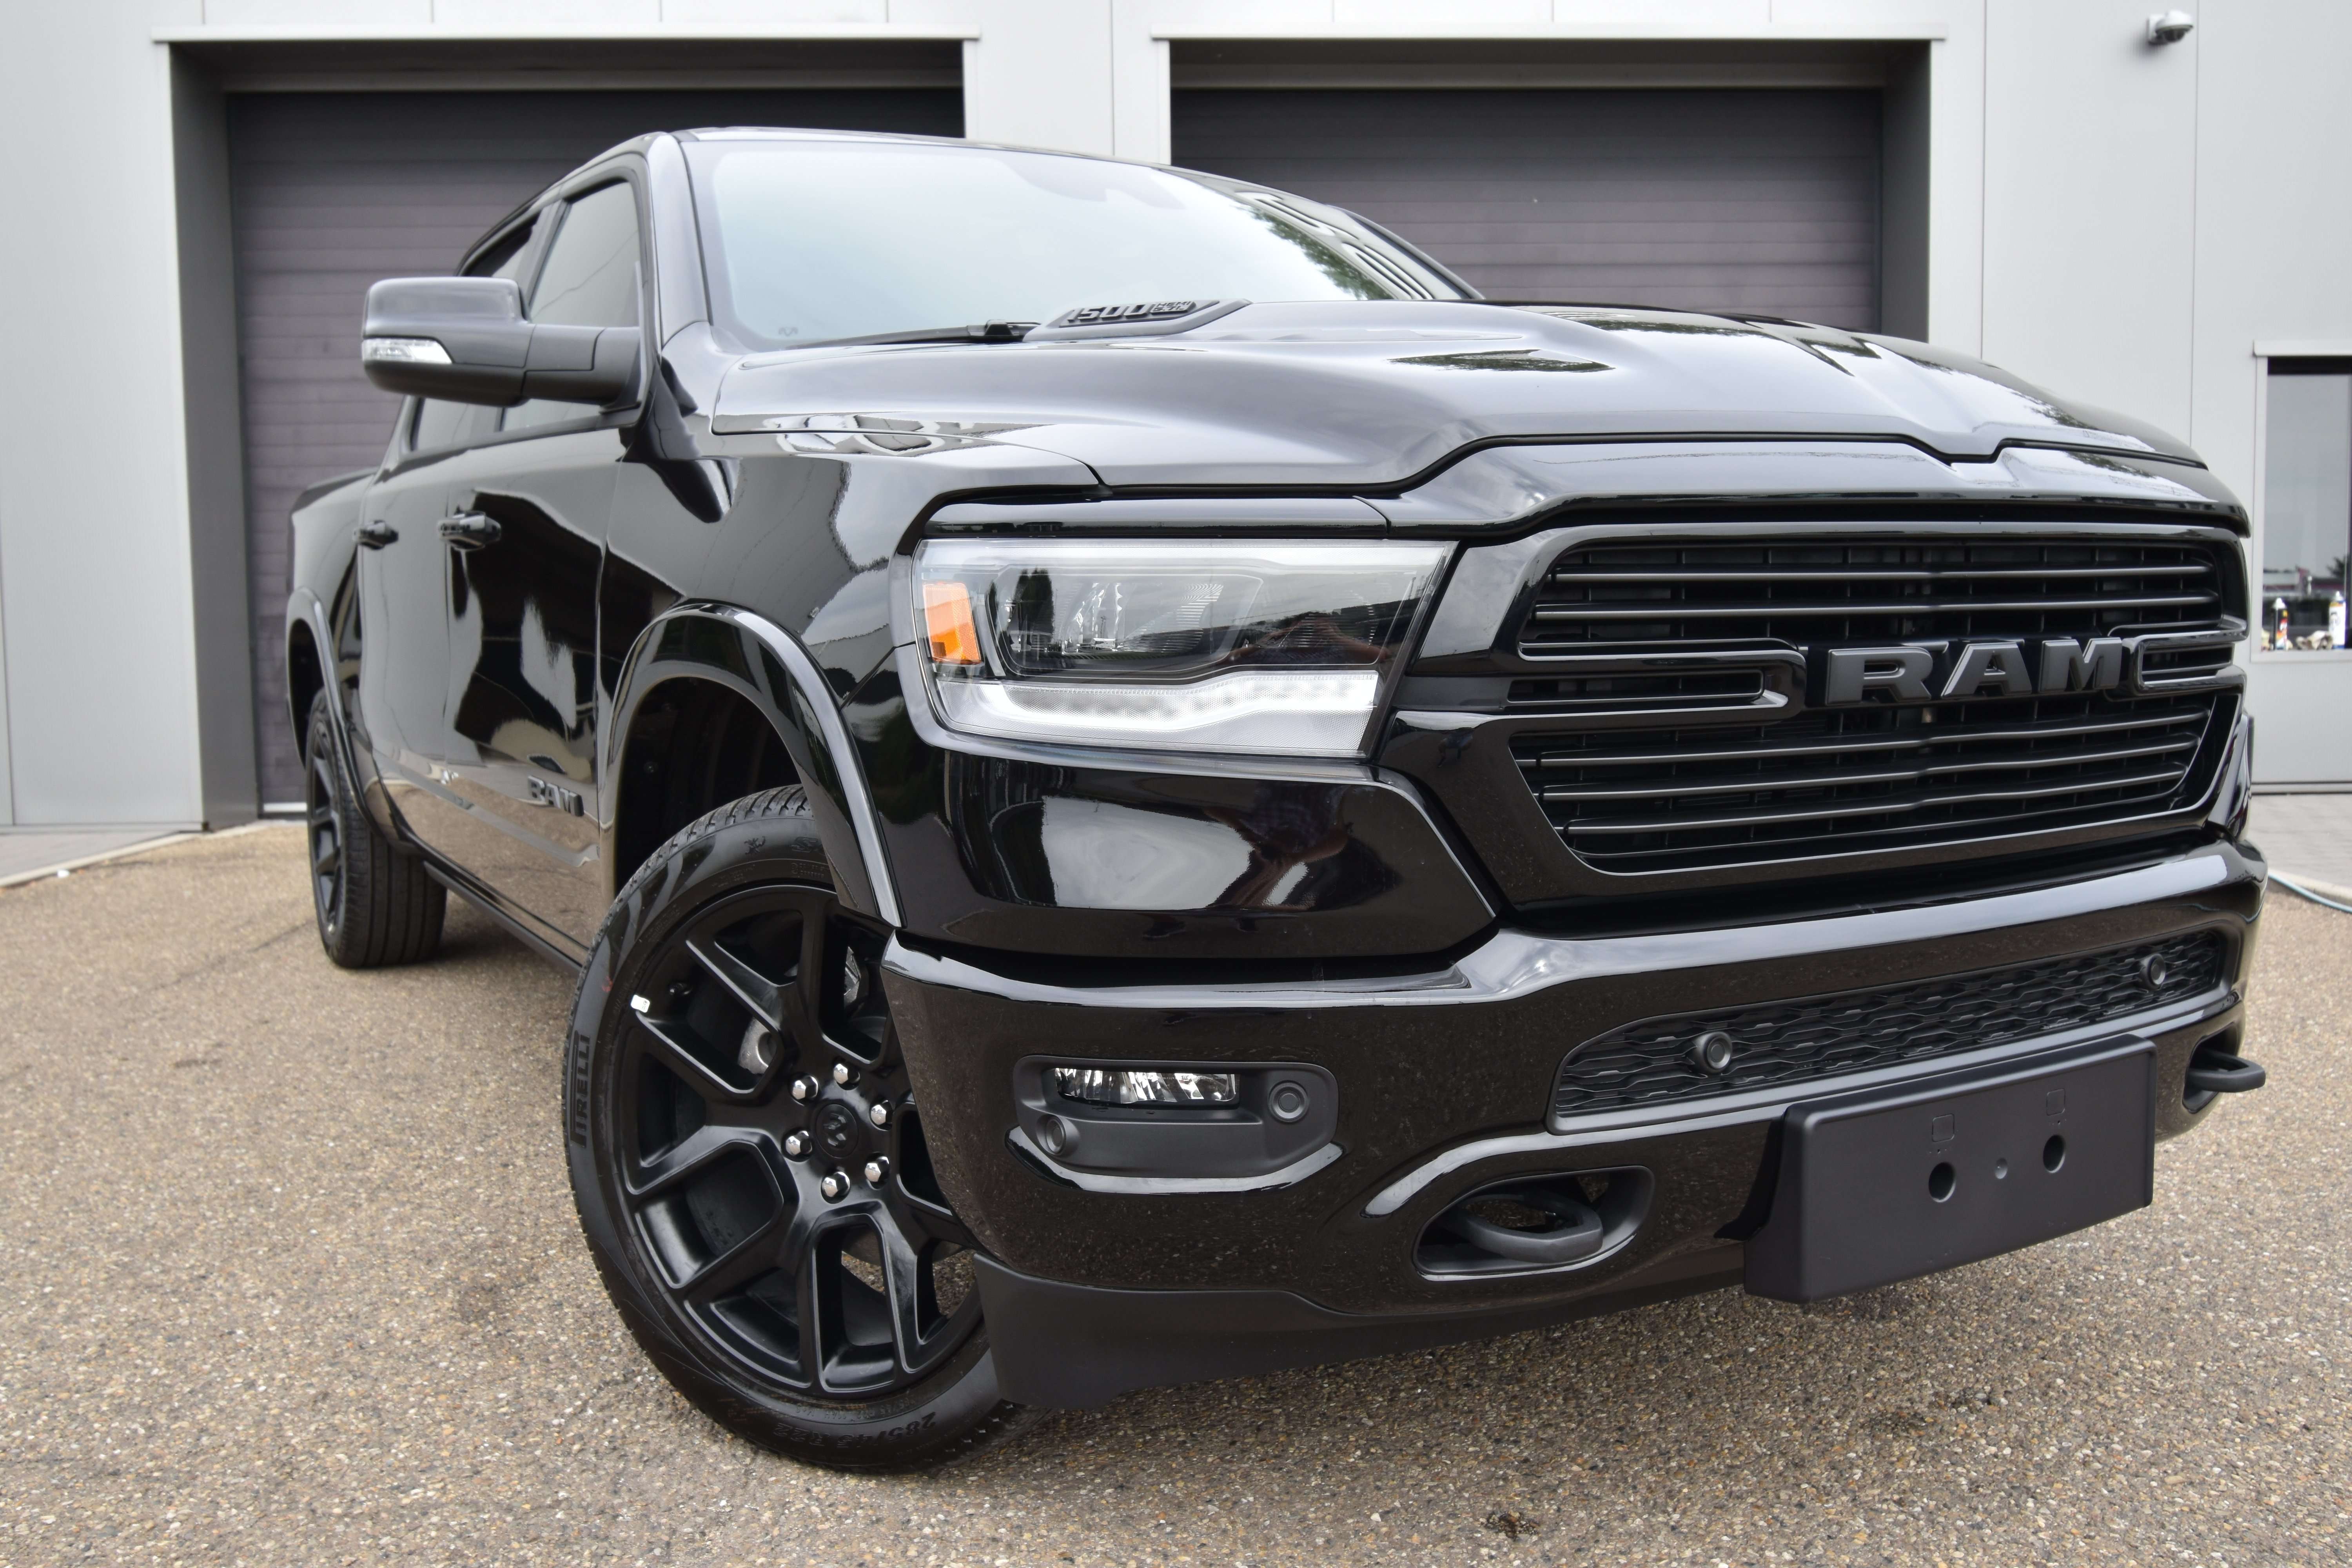 RAM 1500 Off-Road/Pick-up in Black new in Wommelgem for € 83,369.-